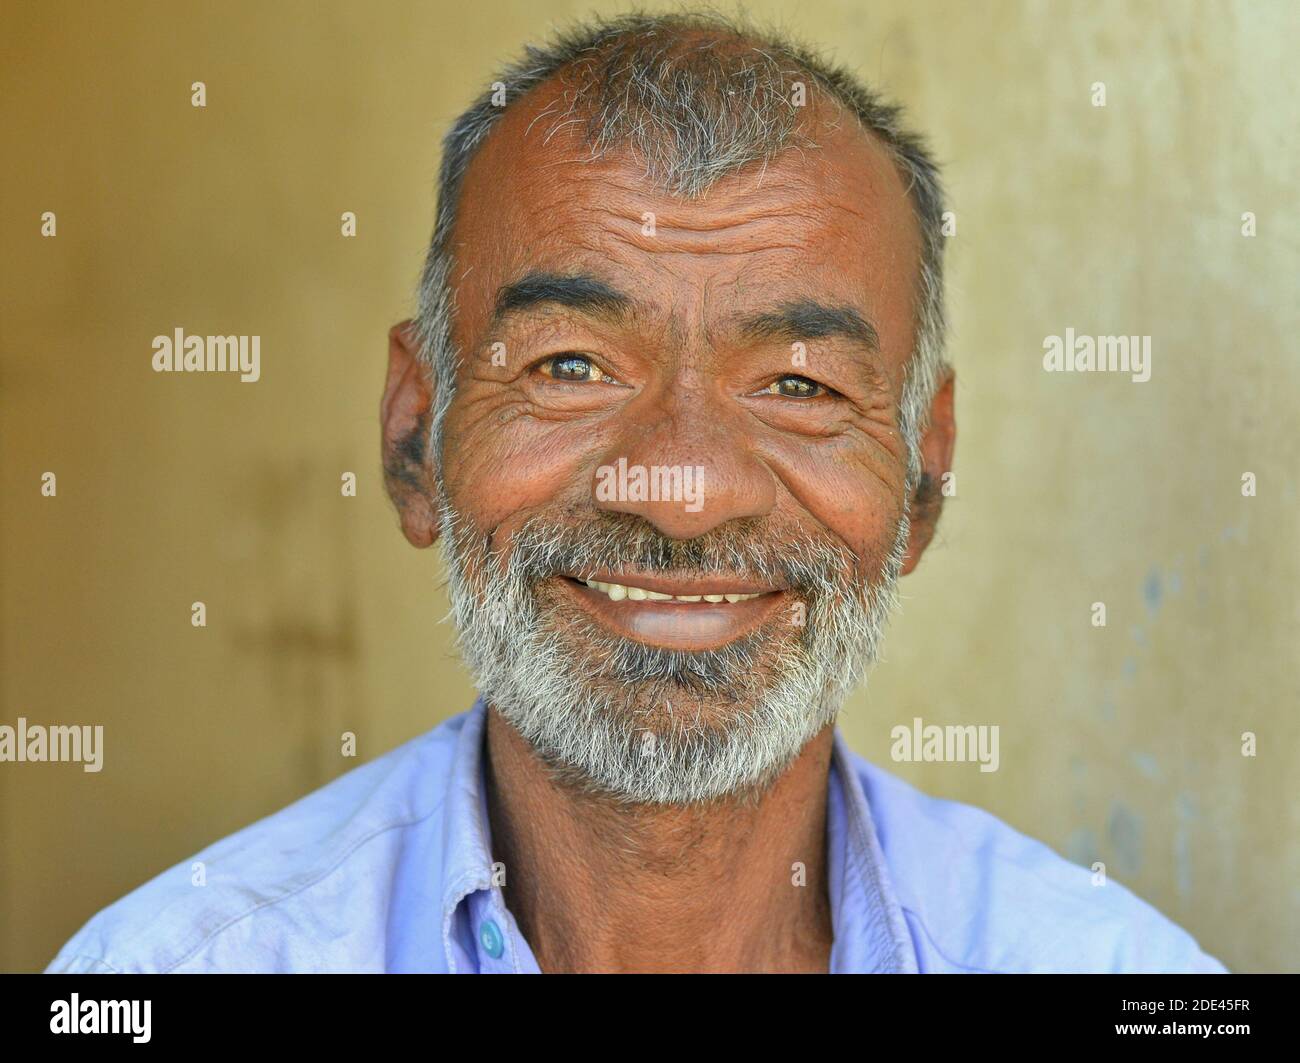 Happy positive middle-aged Indian Gujarati man with short hair smiles for the camera. Stock Photo